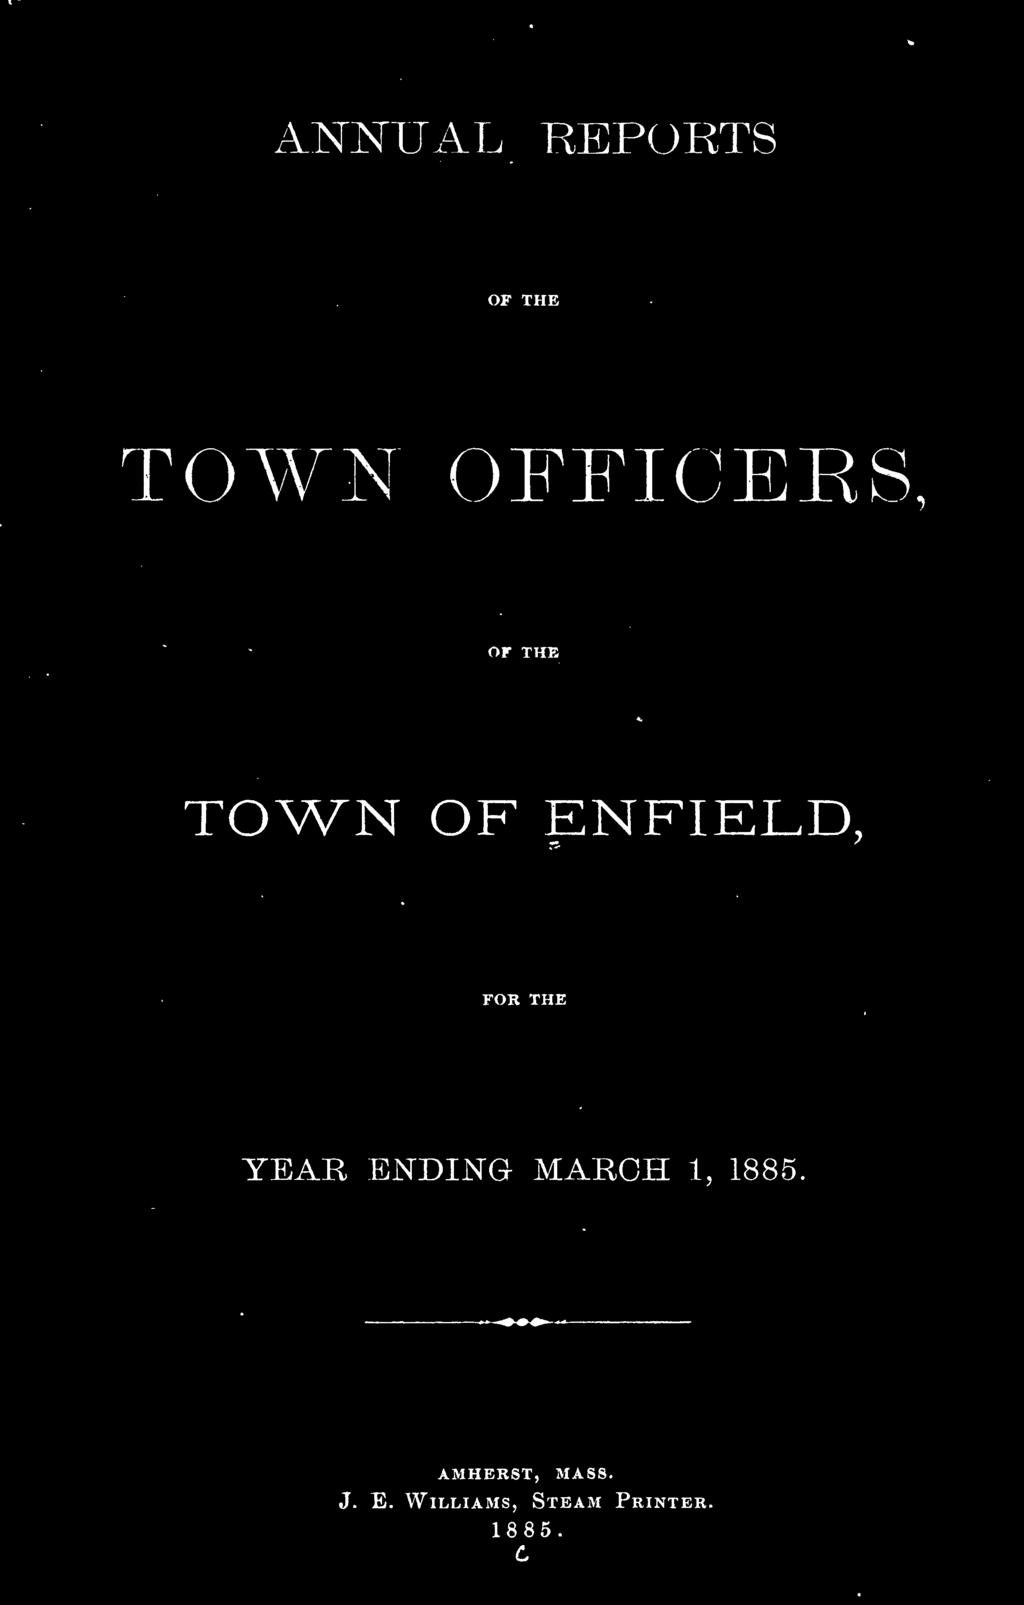 ENDING MARCH 1, 1885 AMHERST, MA88.